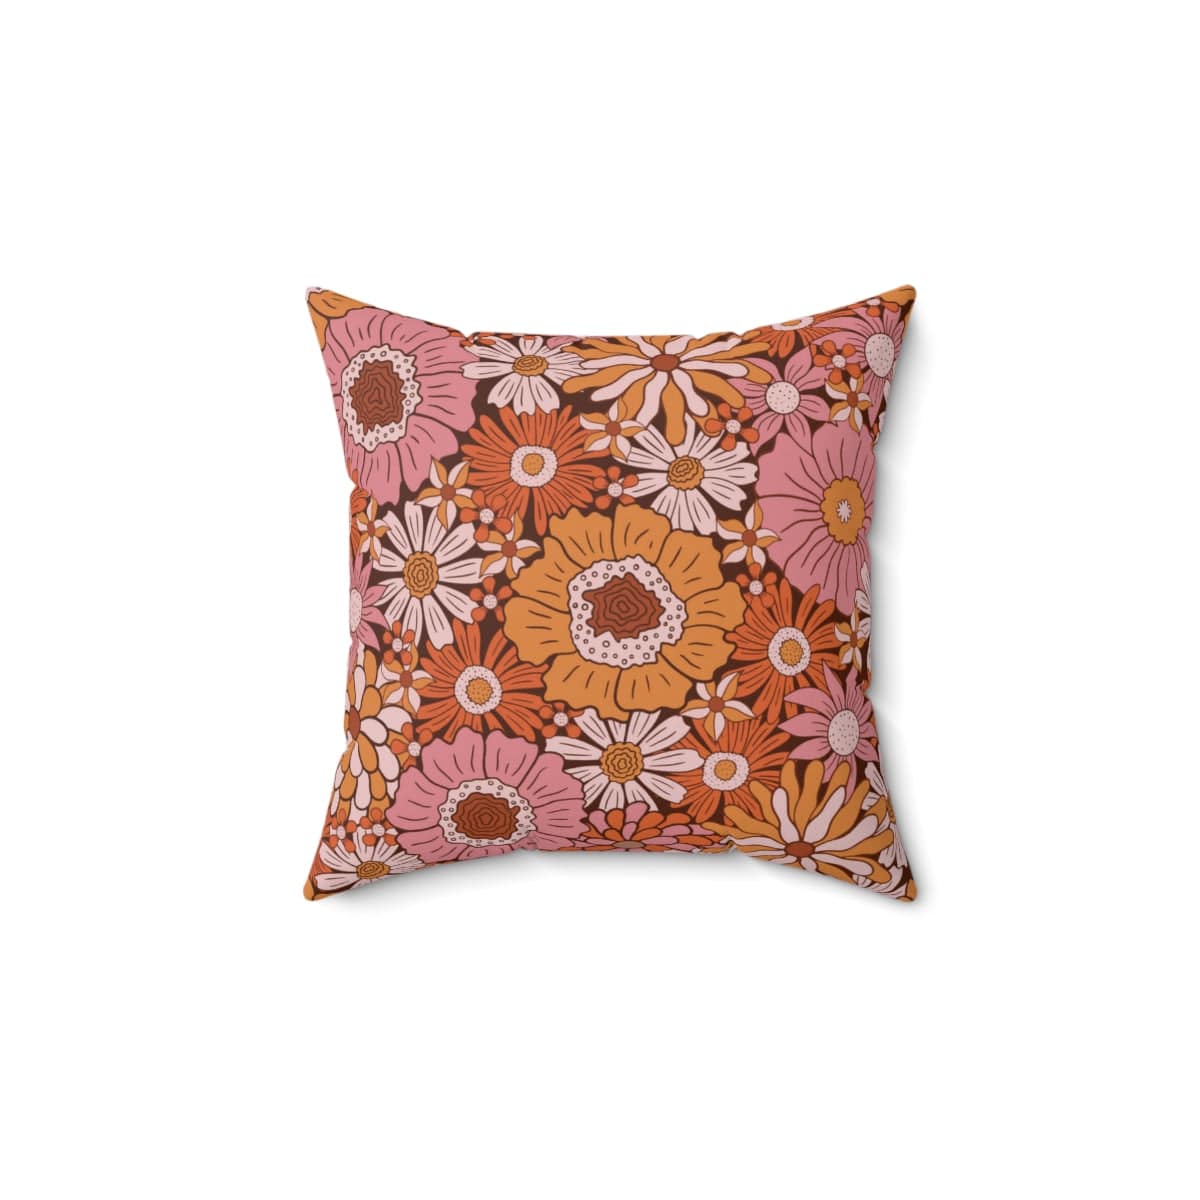 Kate McEnroe New York Mid Century Modern Groovy Floral Pillow Home Decor 14&quot; × 14&quot; 11674053198287552032